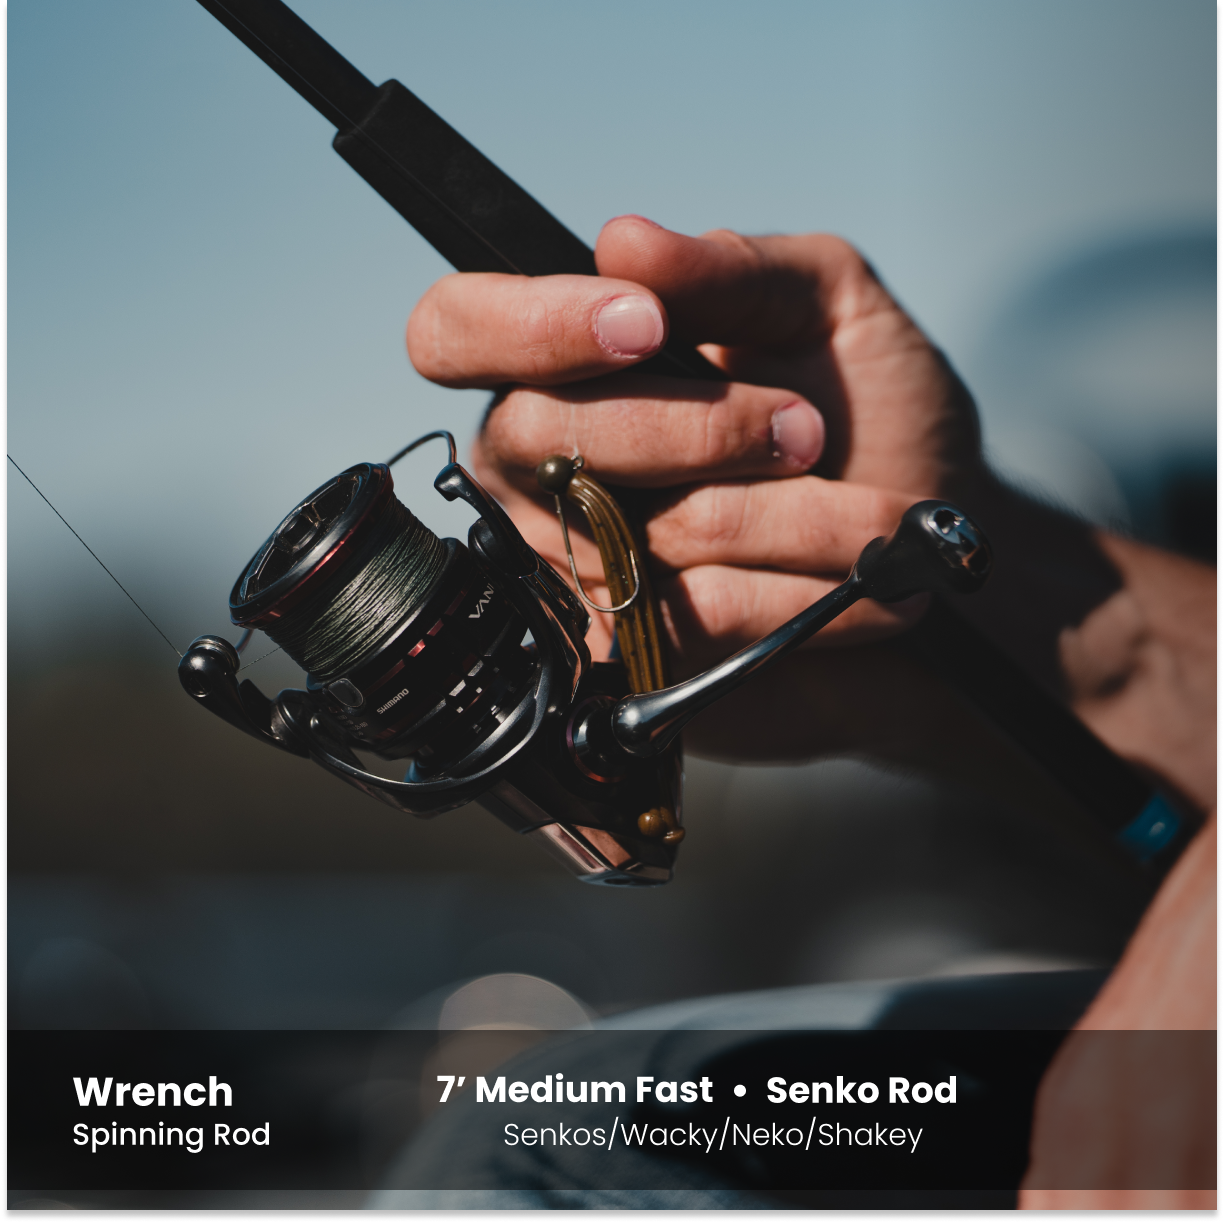 The Ultimate Guide To Fishing Poles For Every Level Of Angler In